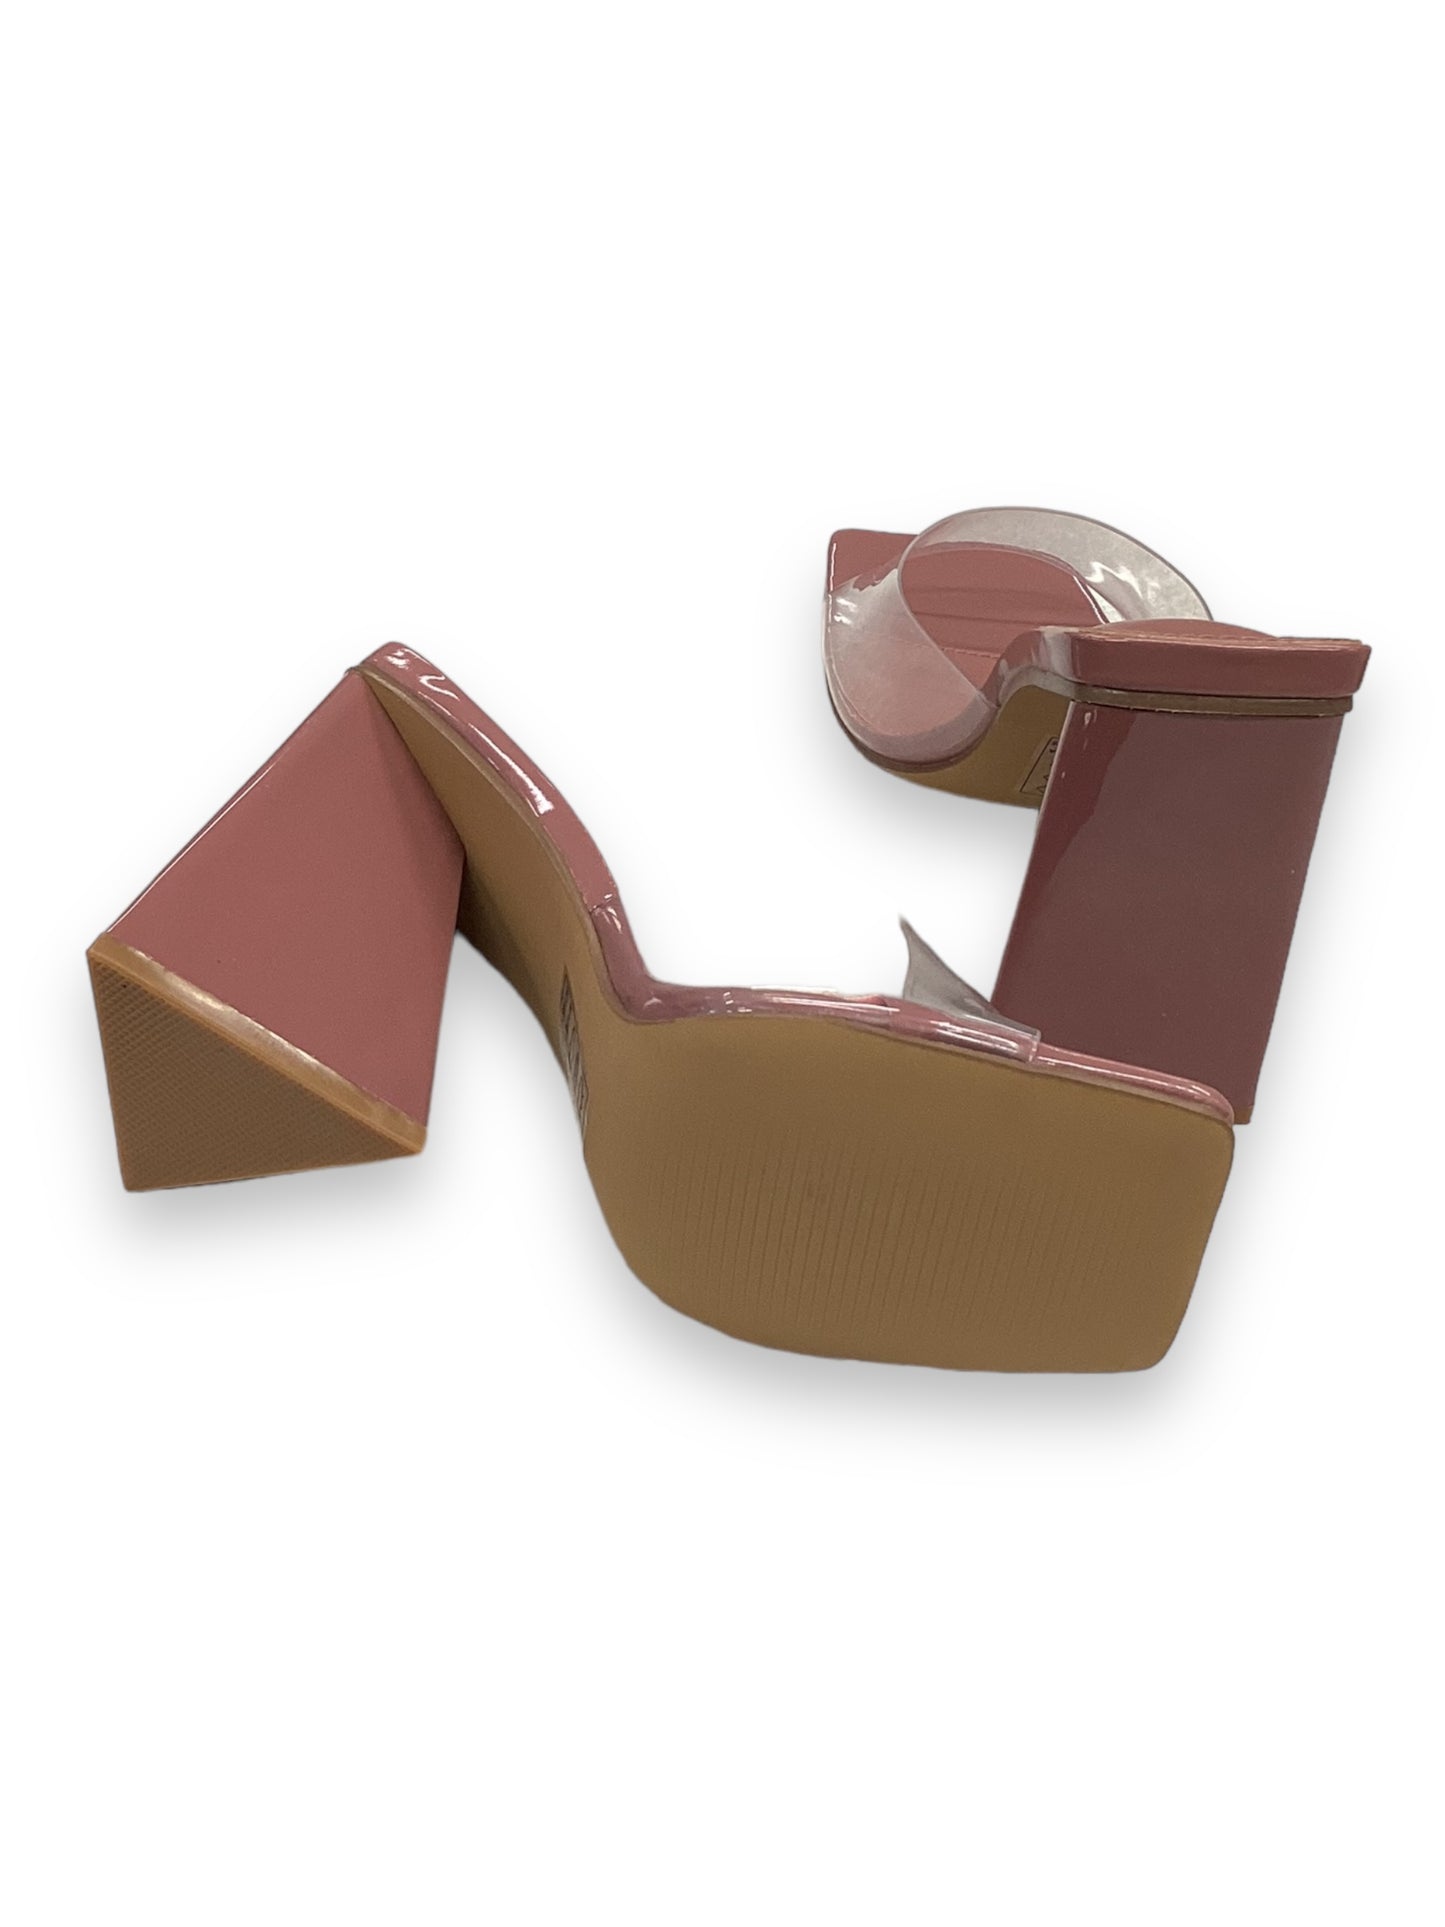 Sandals Heels Block By Qupid  Size: 8